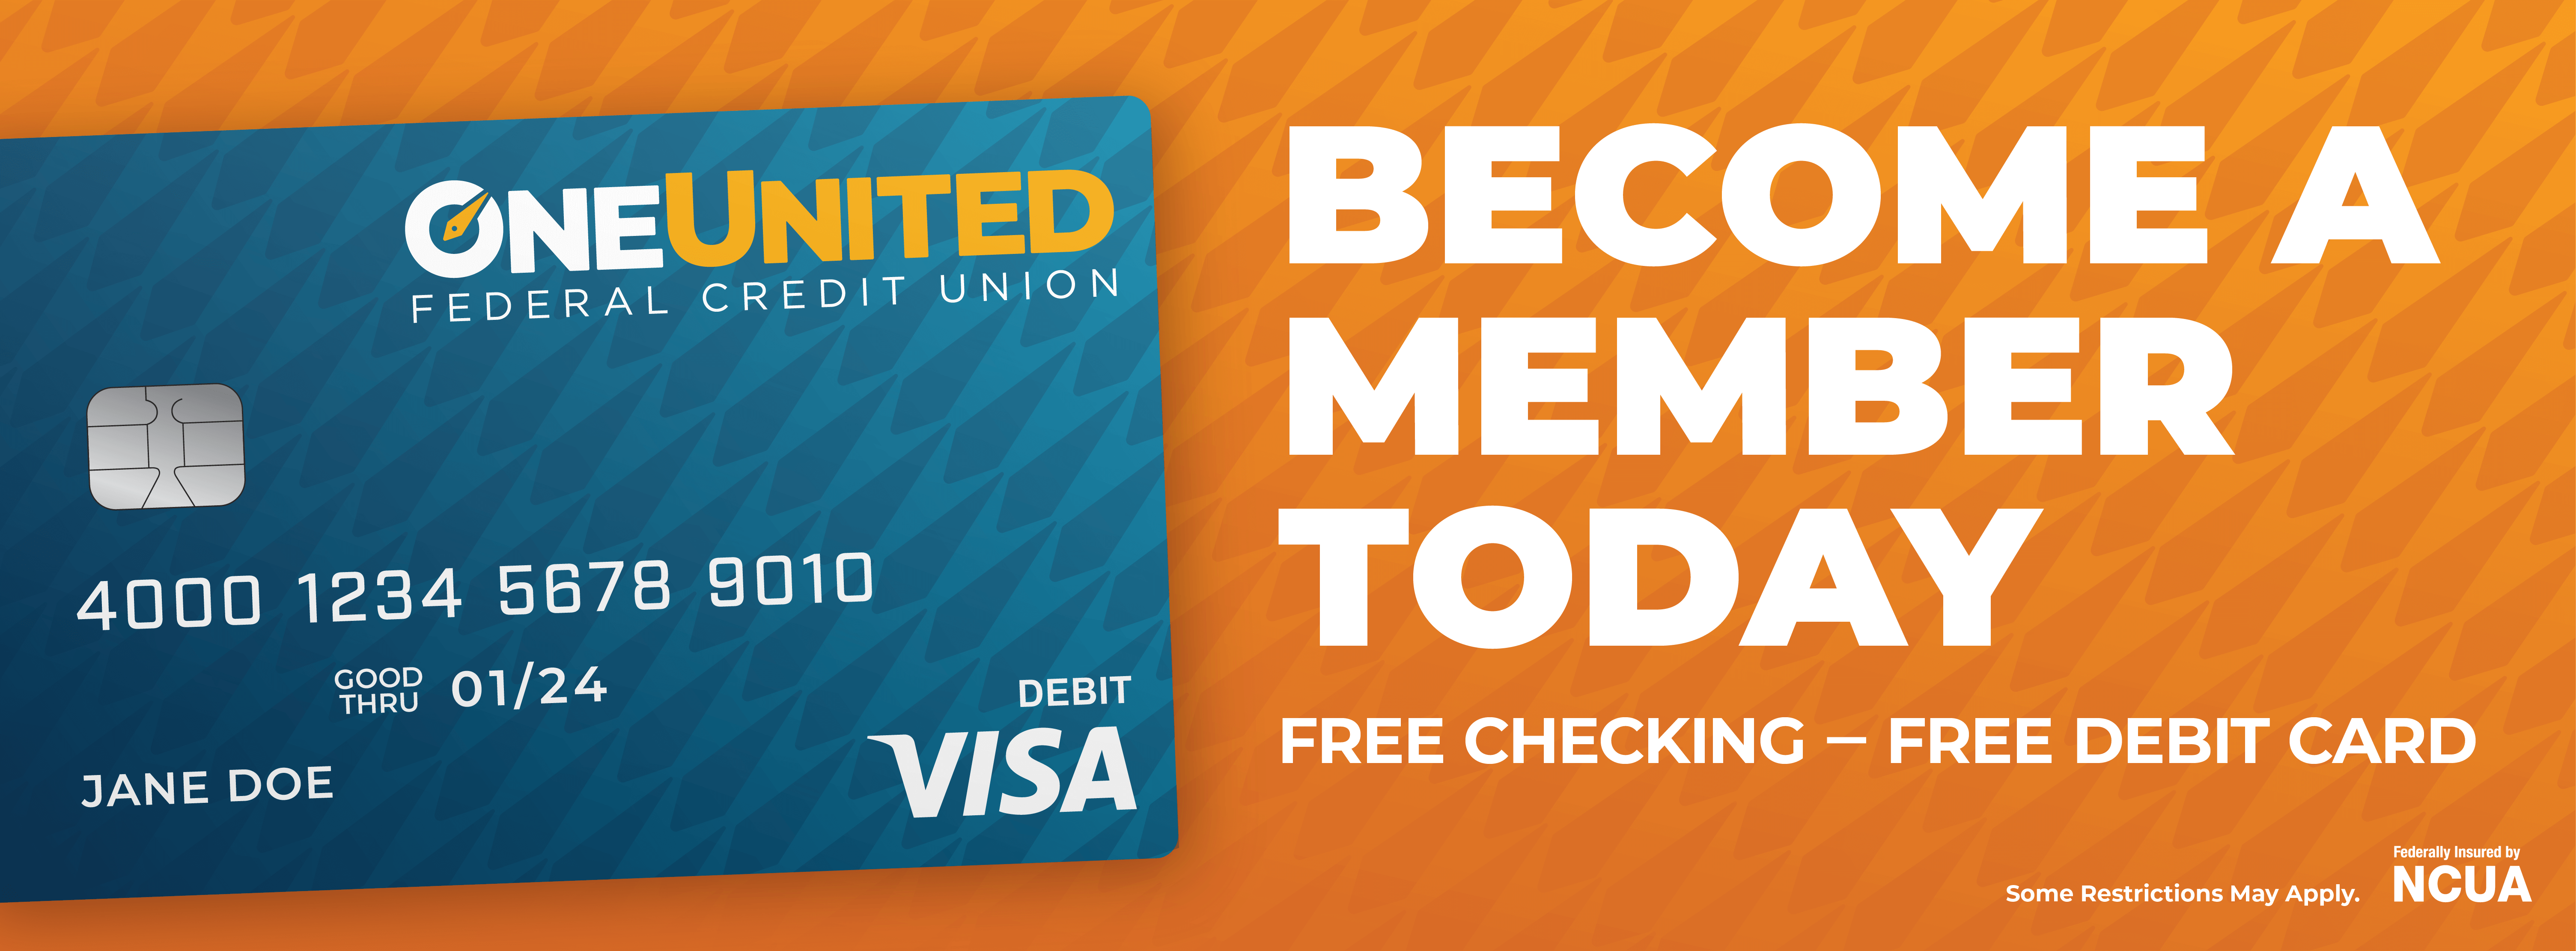 BECOME A MEMBER TODAY